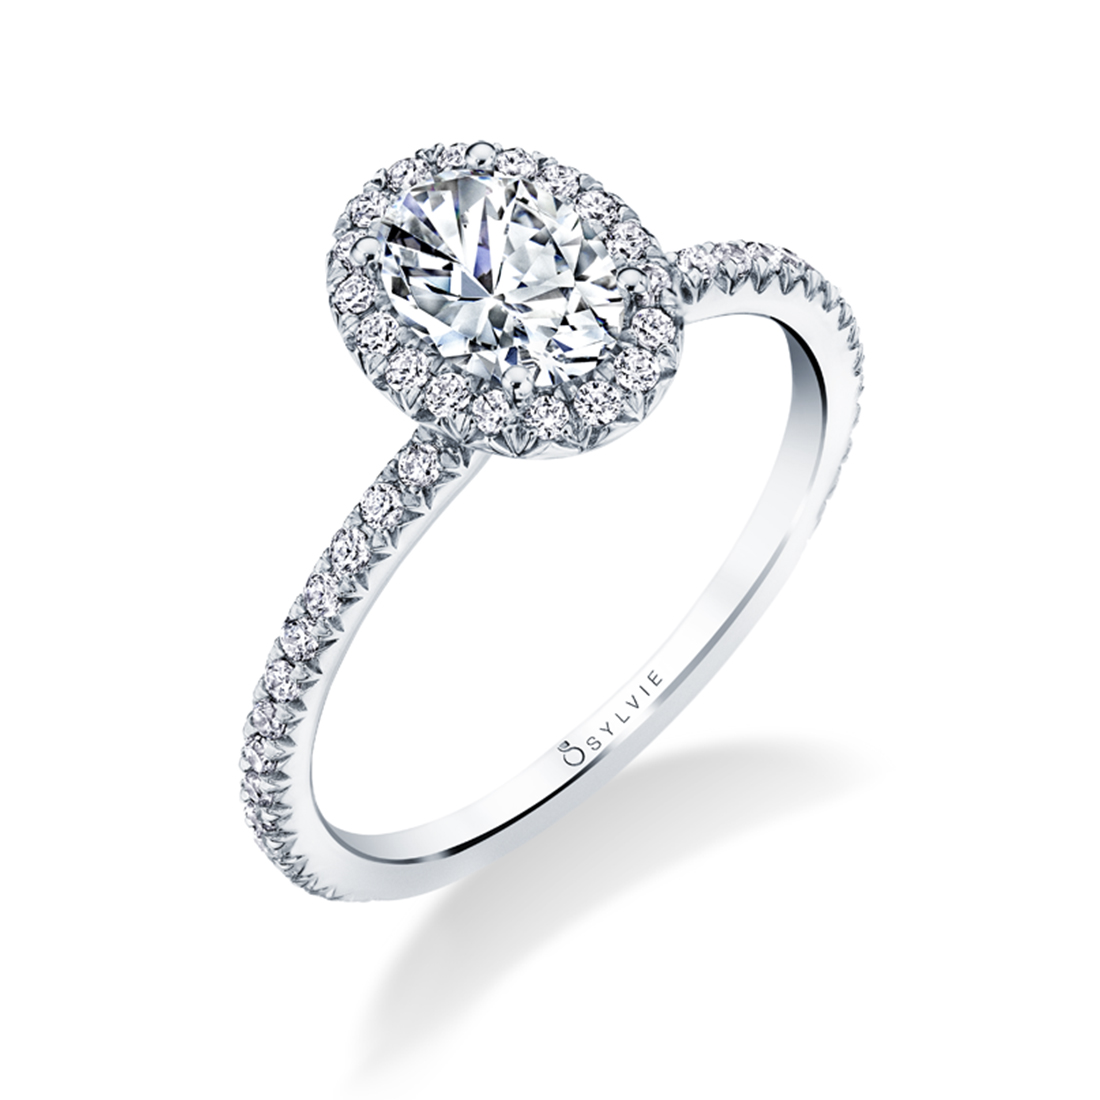 Oval Cut Classic Halo Engagement Ring - Vivian S1793-032A4W10O ...